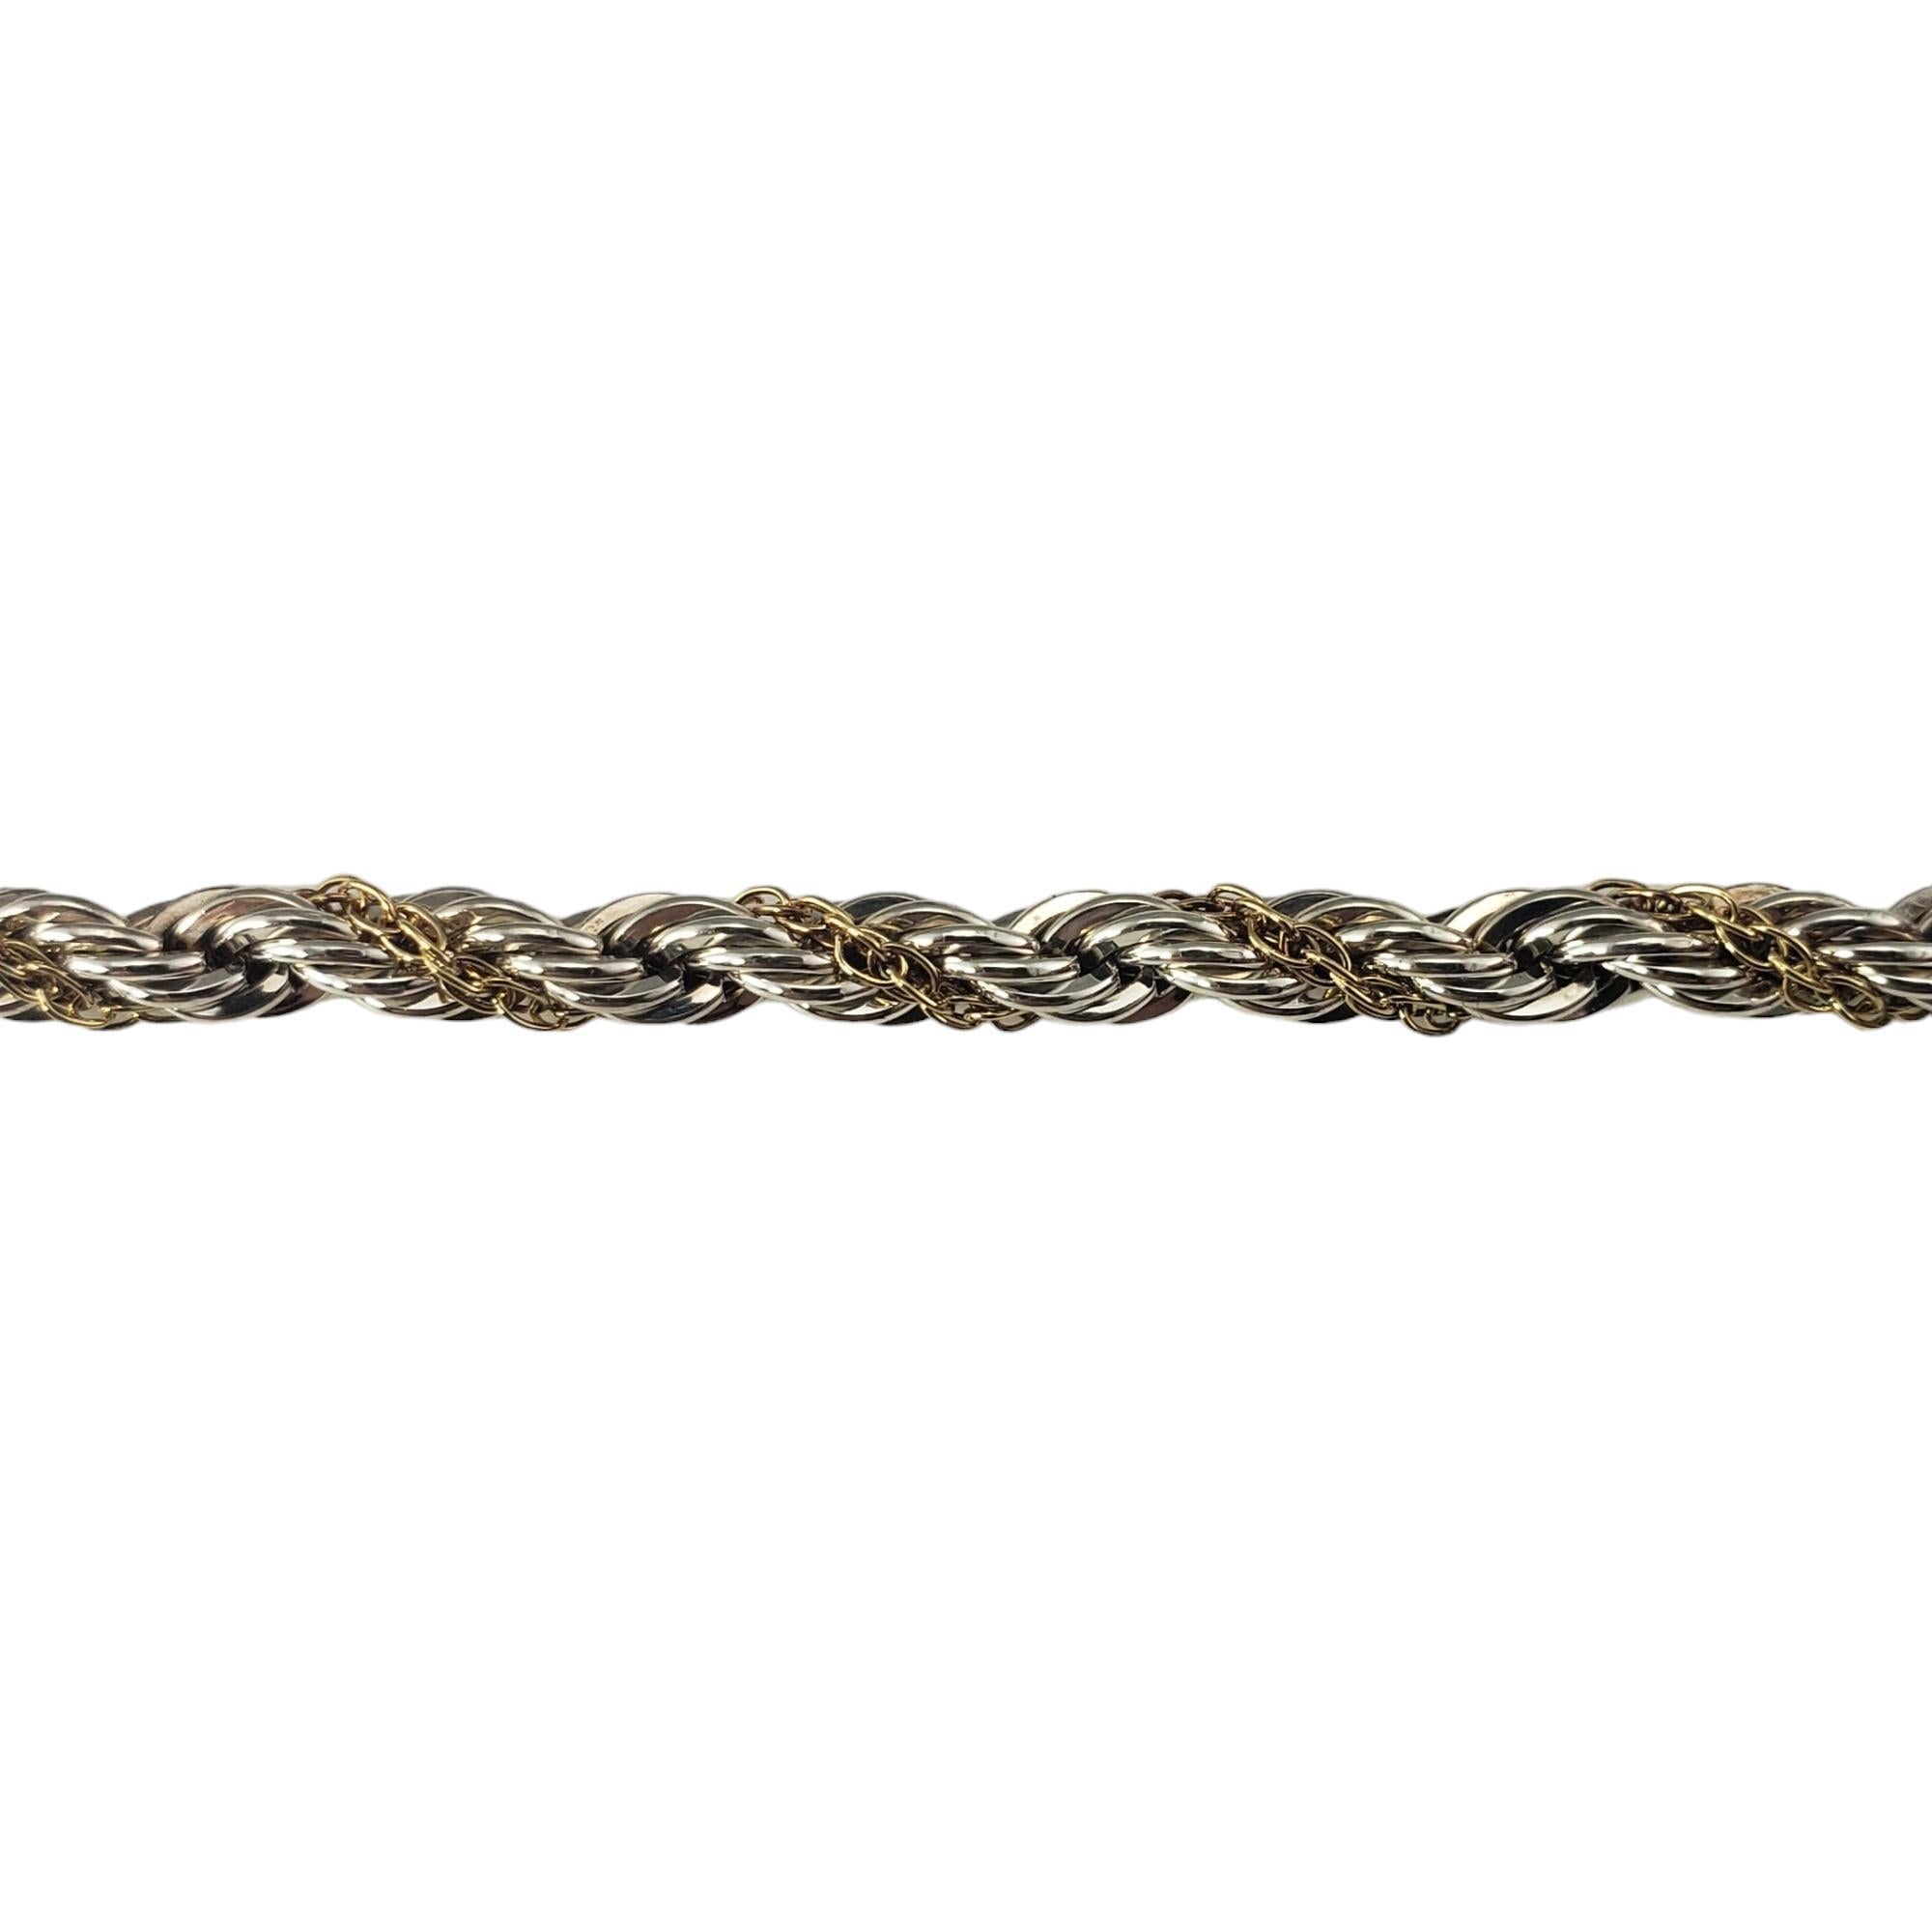 Women's Tiffany & Co. Sterling Silver 18K Yellow Gold Twisted Rope Necklace #16849